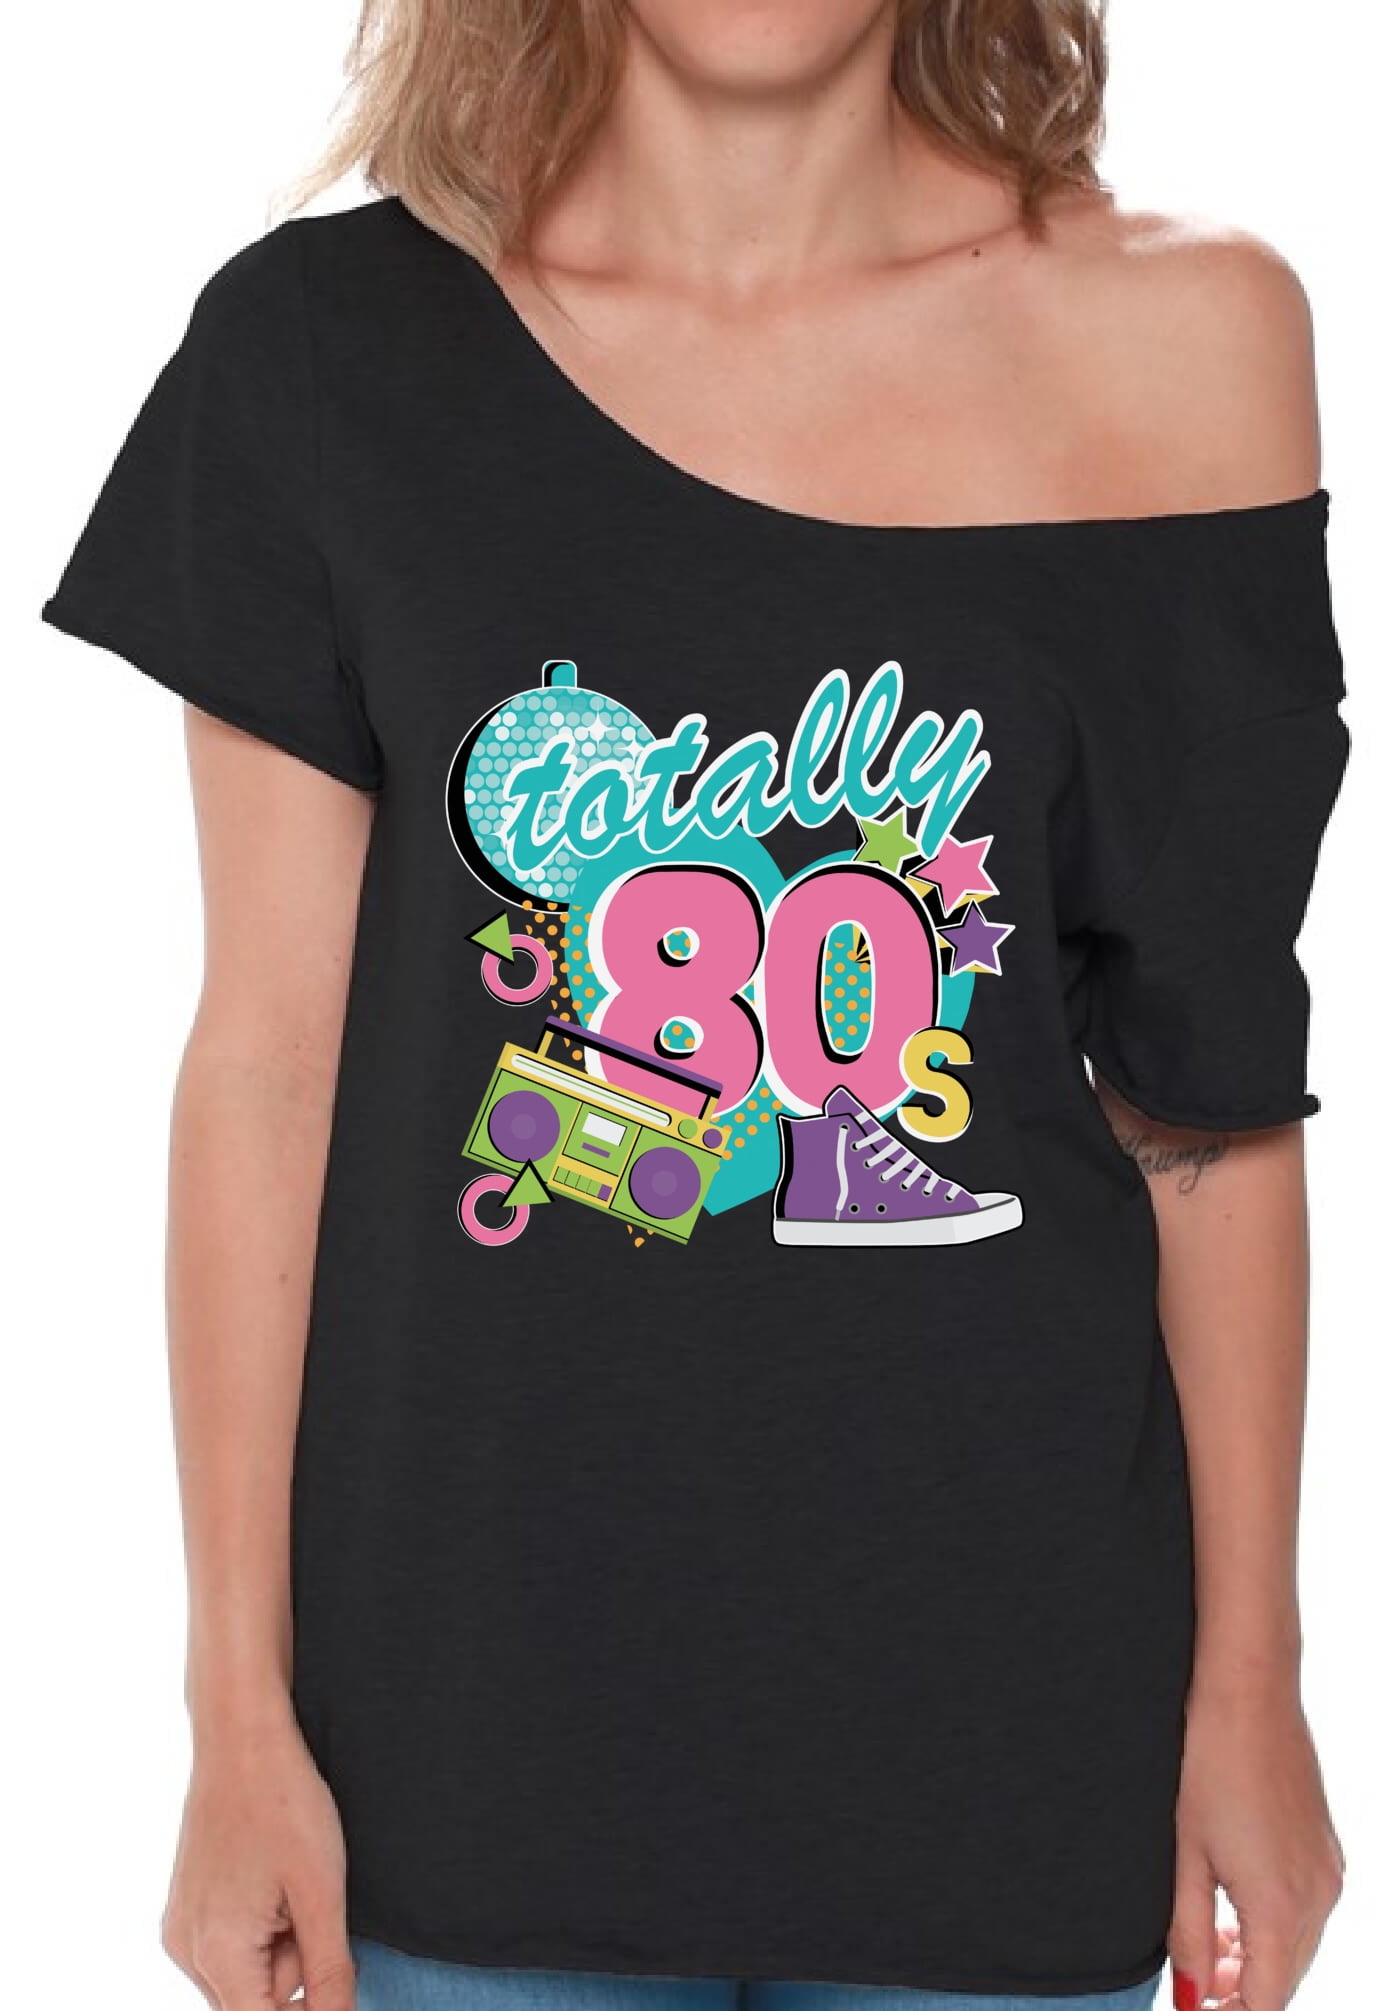 Costume 80's Clothes for Women Totally 80's Off The Shoulder - L XL 2XL 3XL - Retro 80s Graphic Tee - Walmart.com